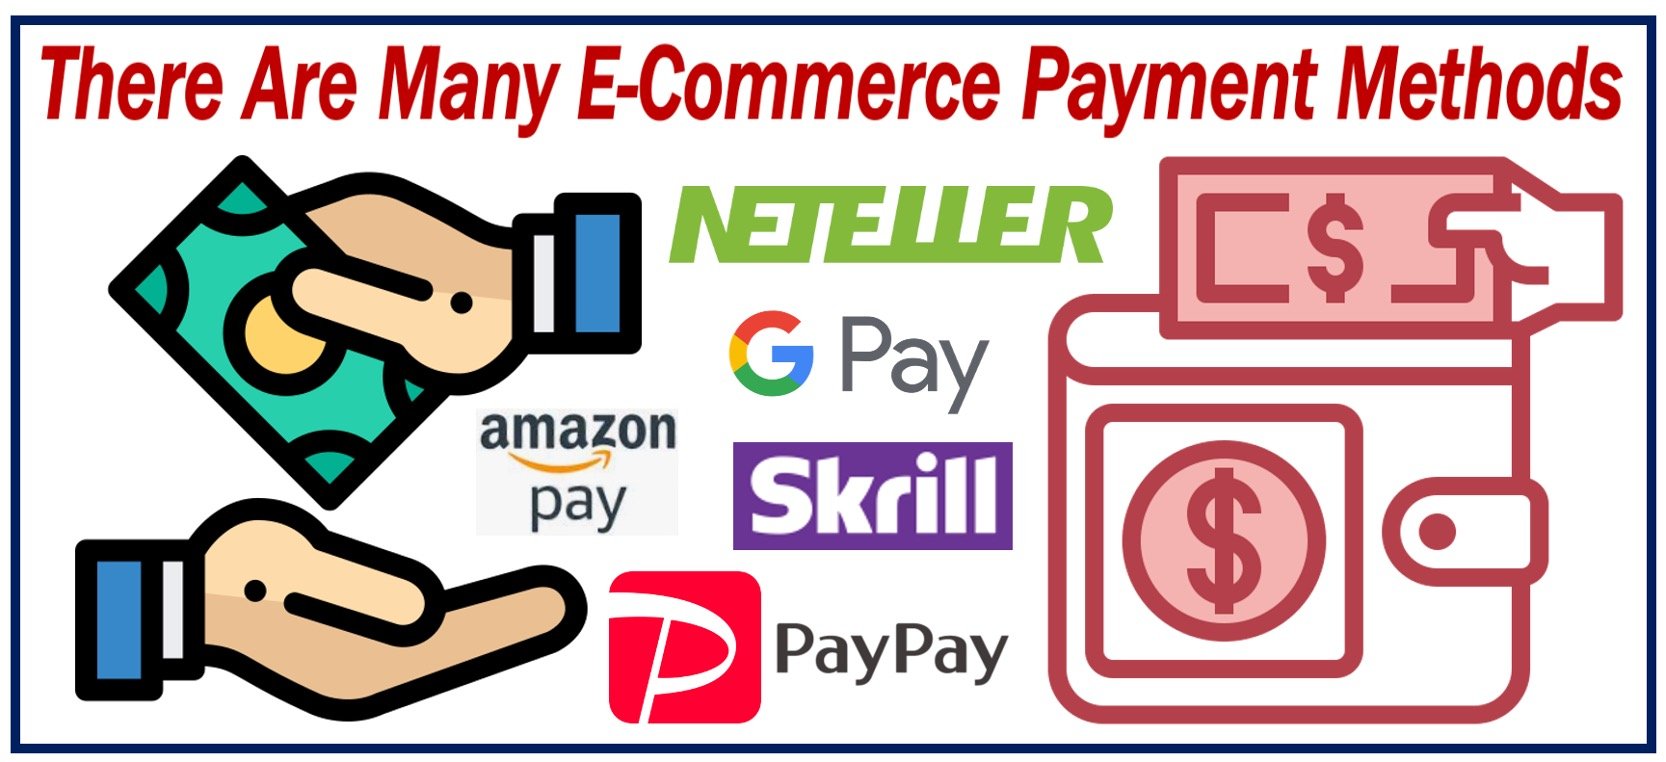 Image depicting some e-commerce payment methods